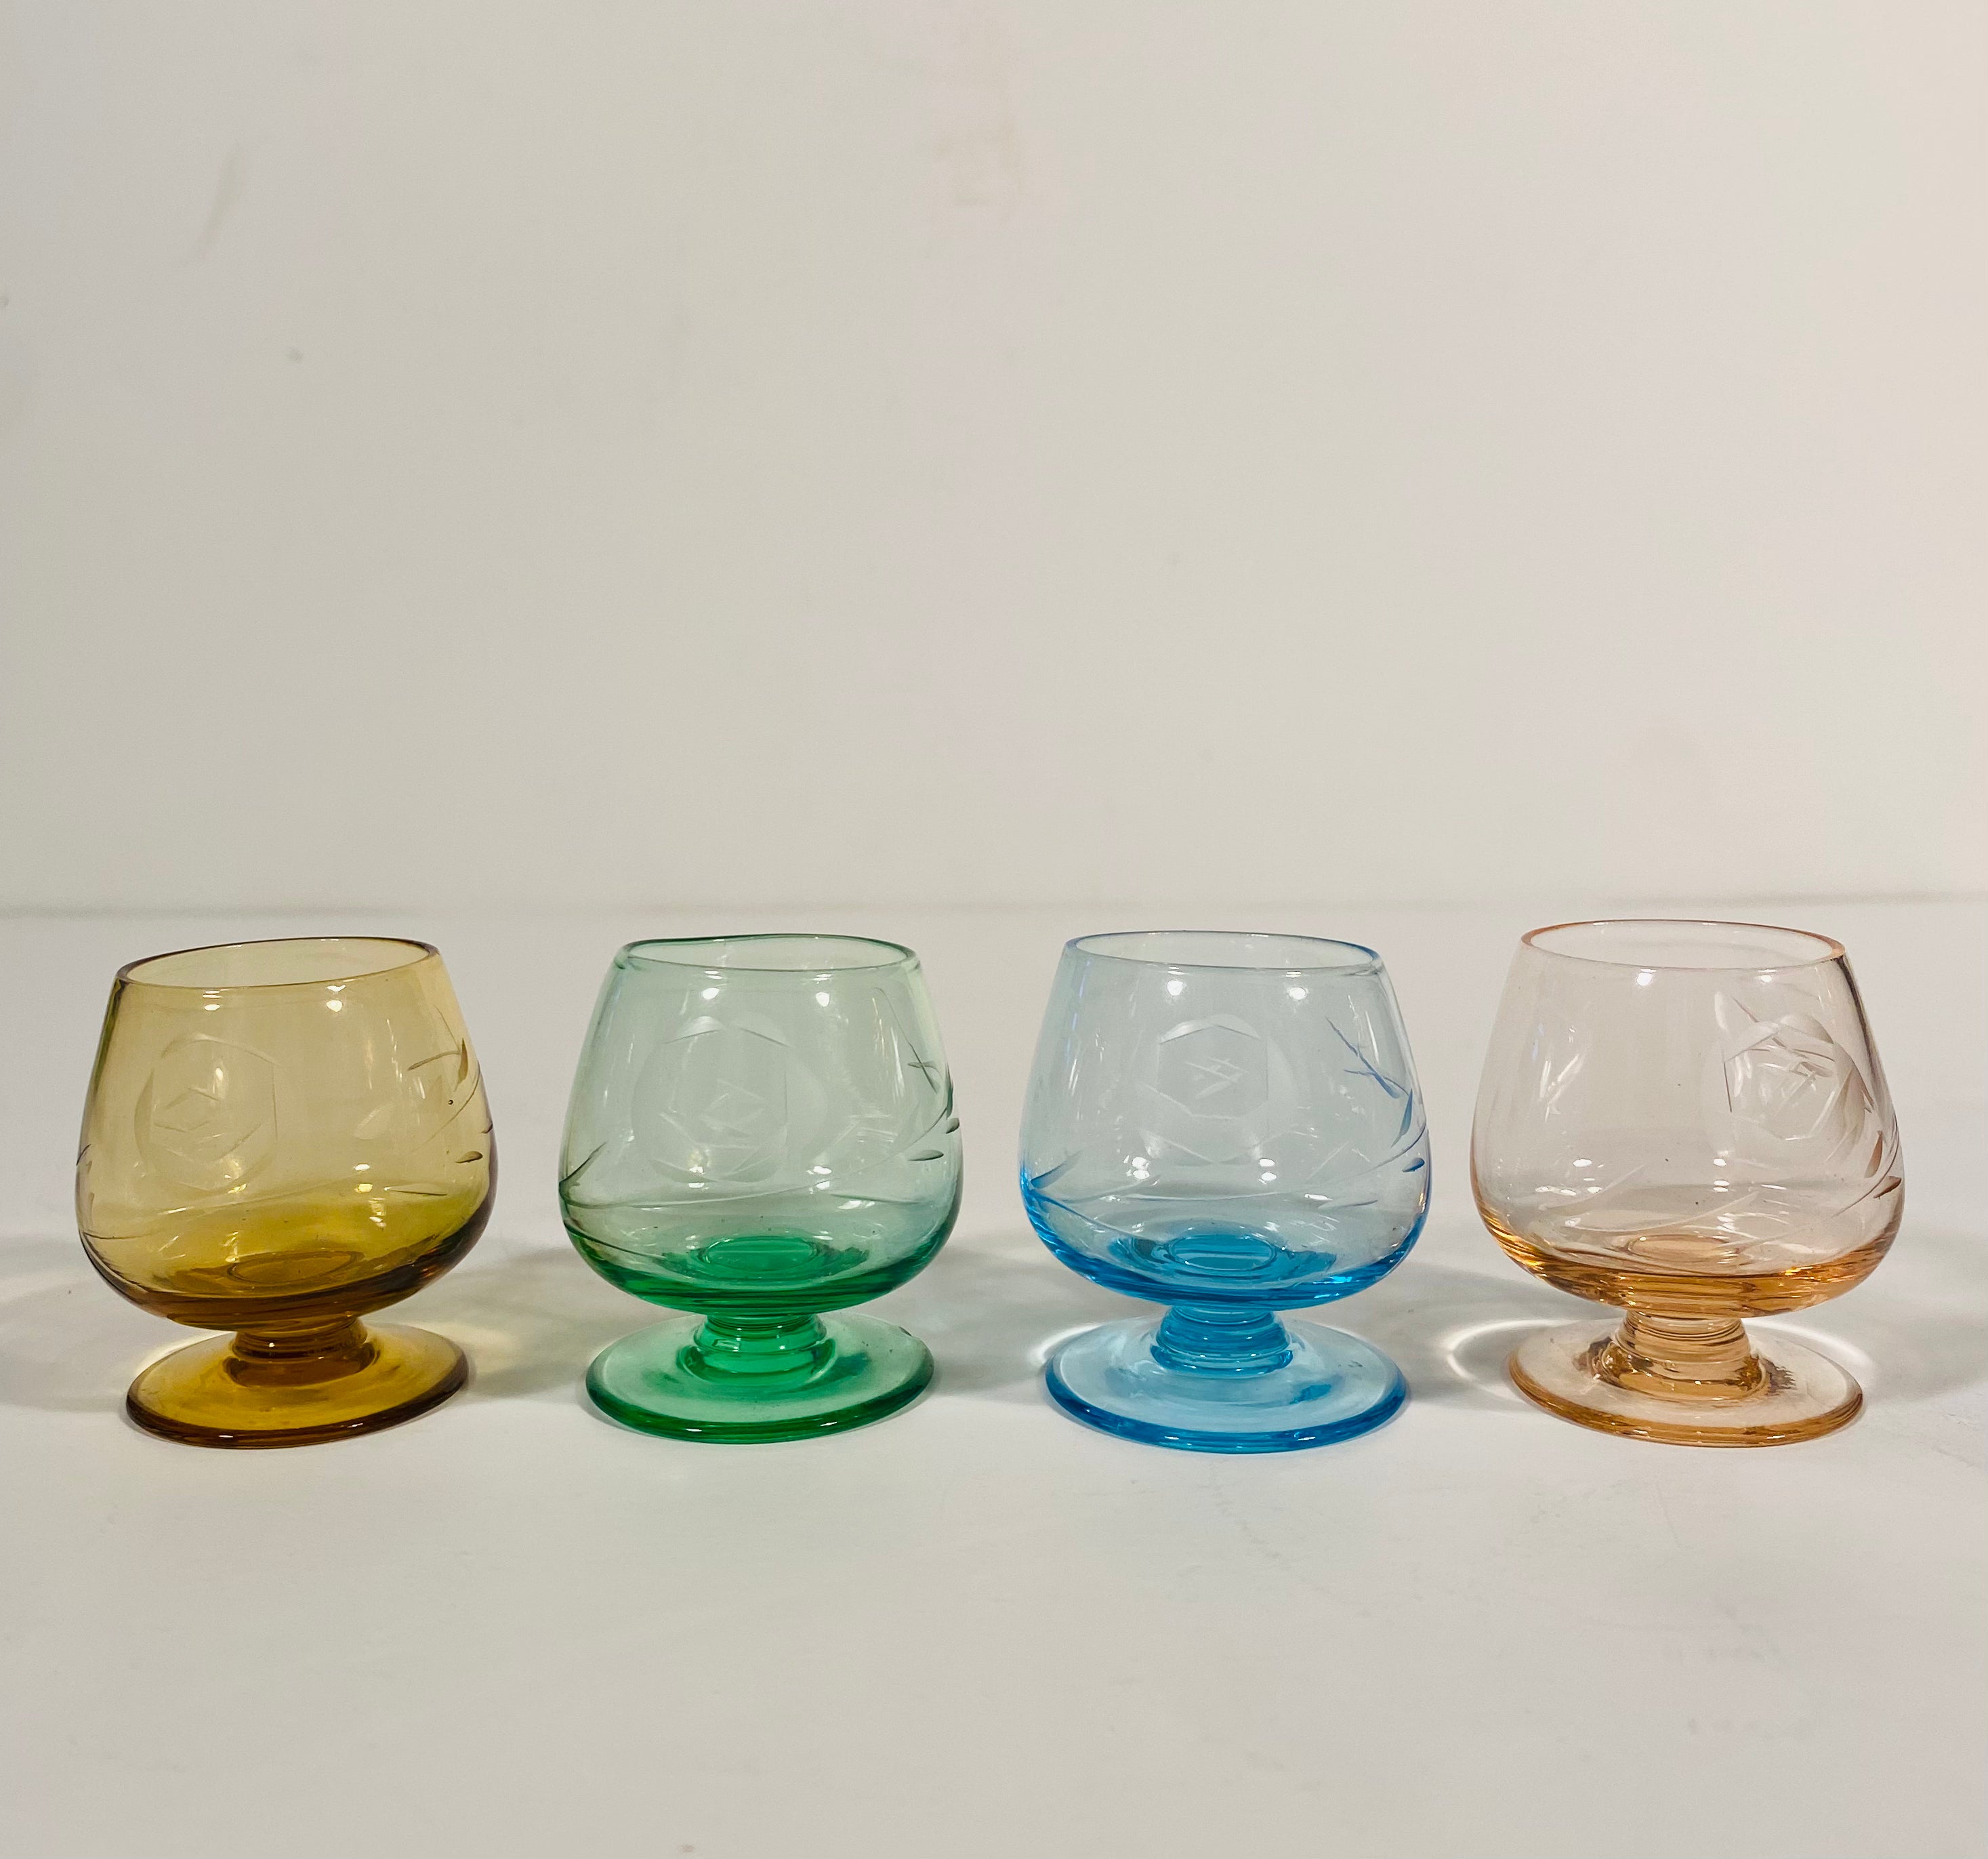 Vintage Colored Aperitif/Shot Glasses with Etched Rose Detail - Set of 4